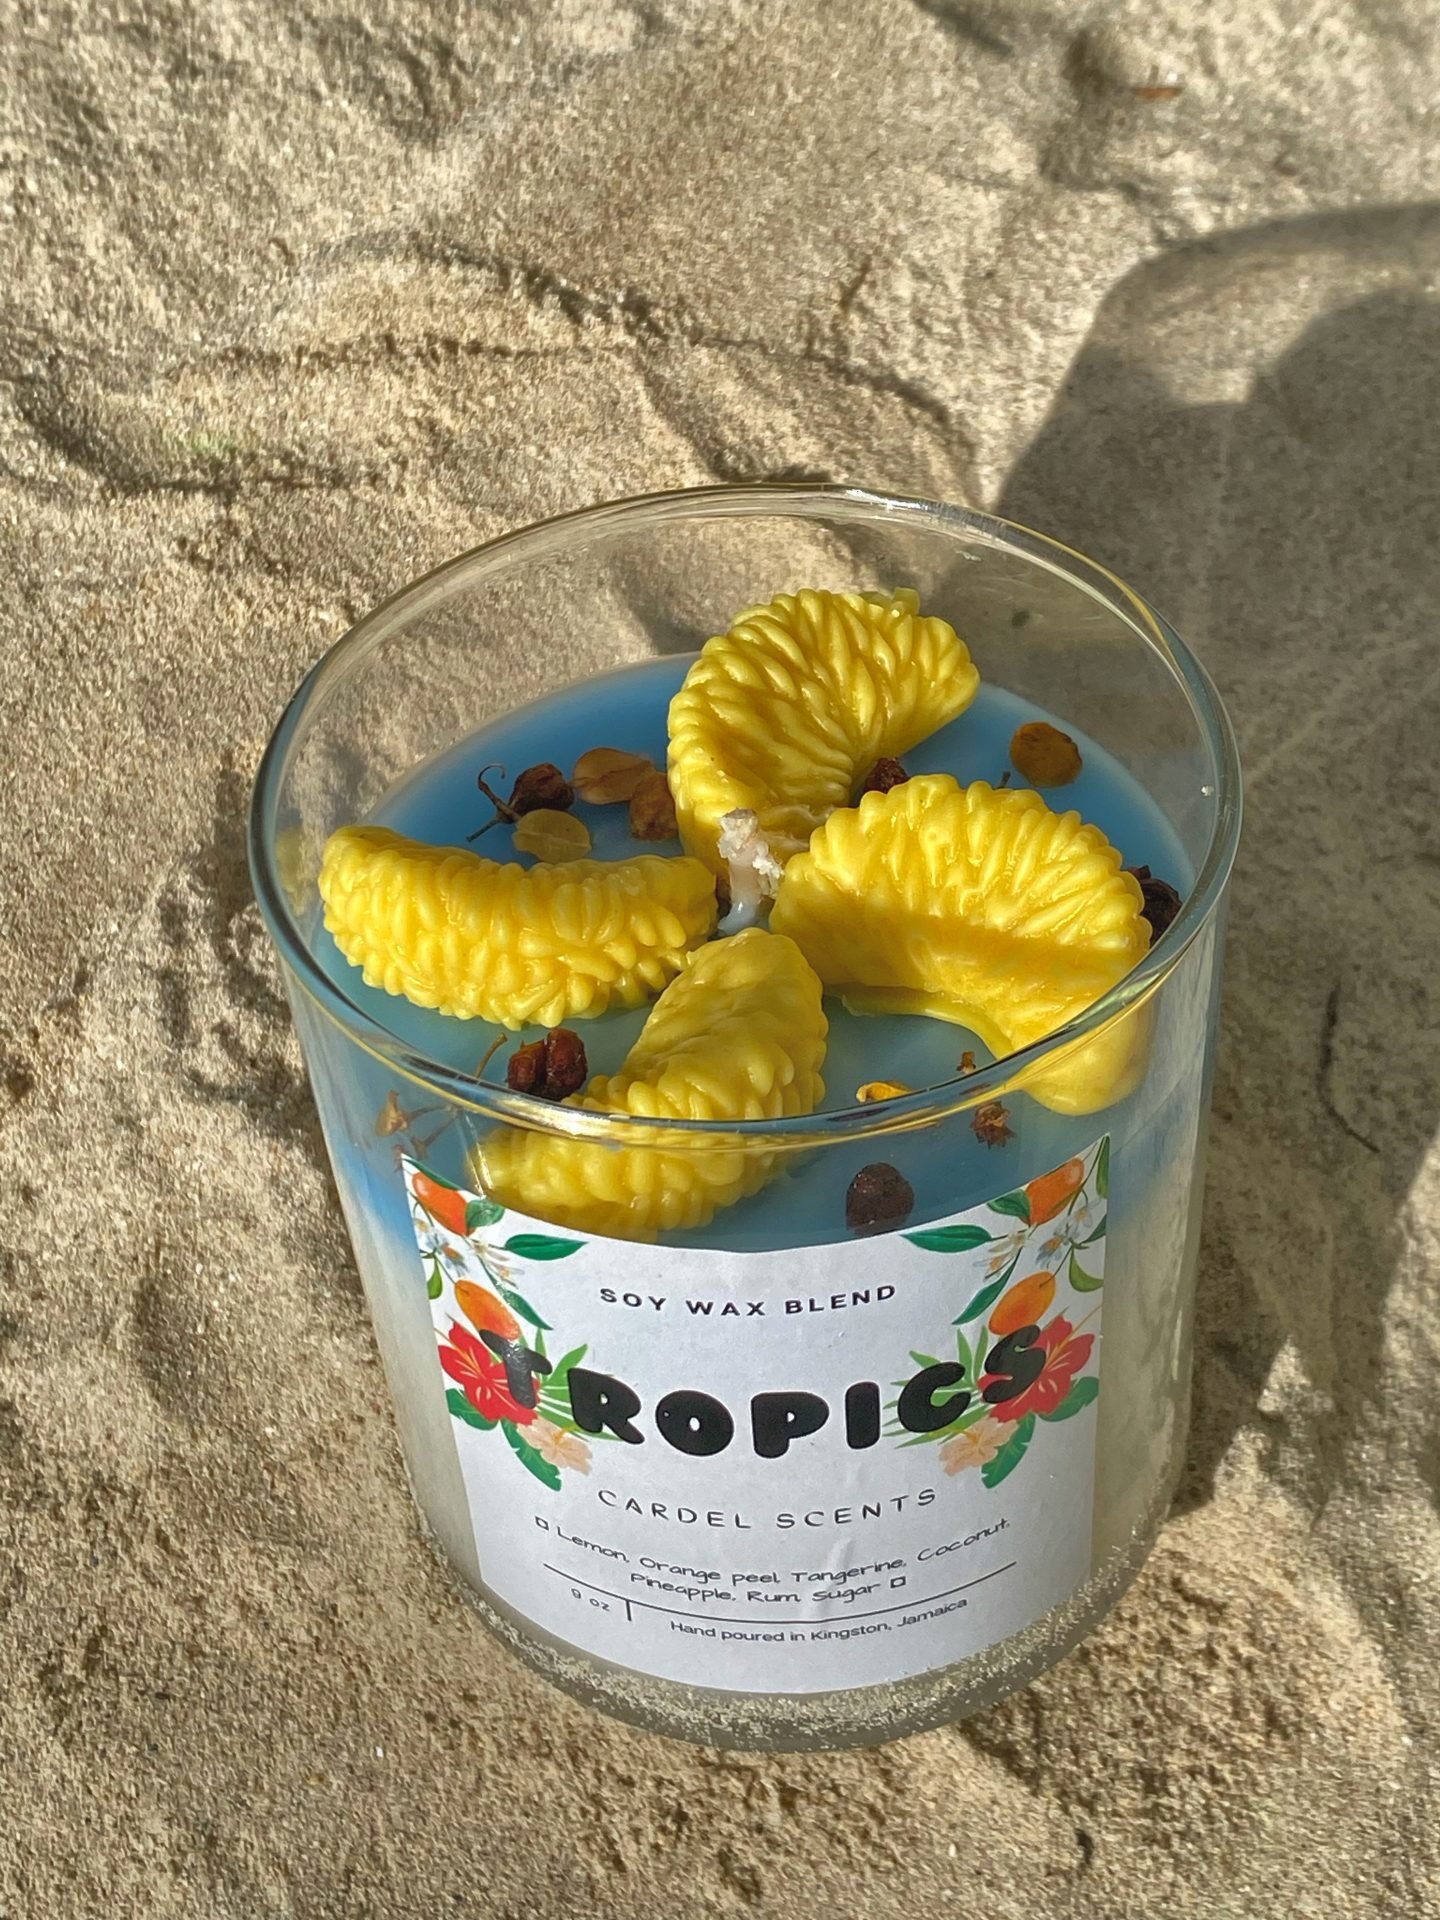 9oz Soywax blend Tropical scented candle